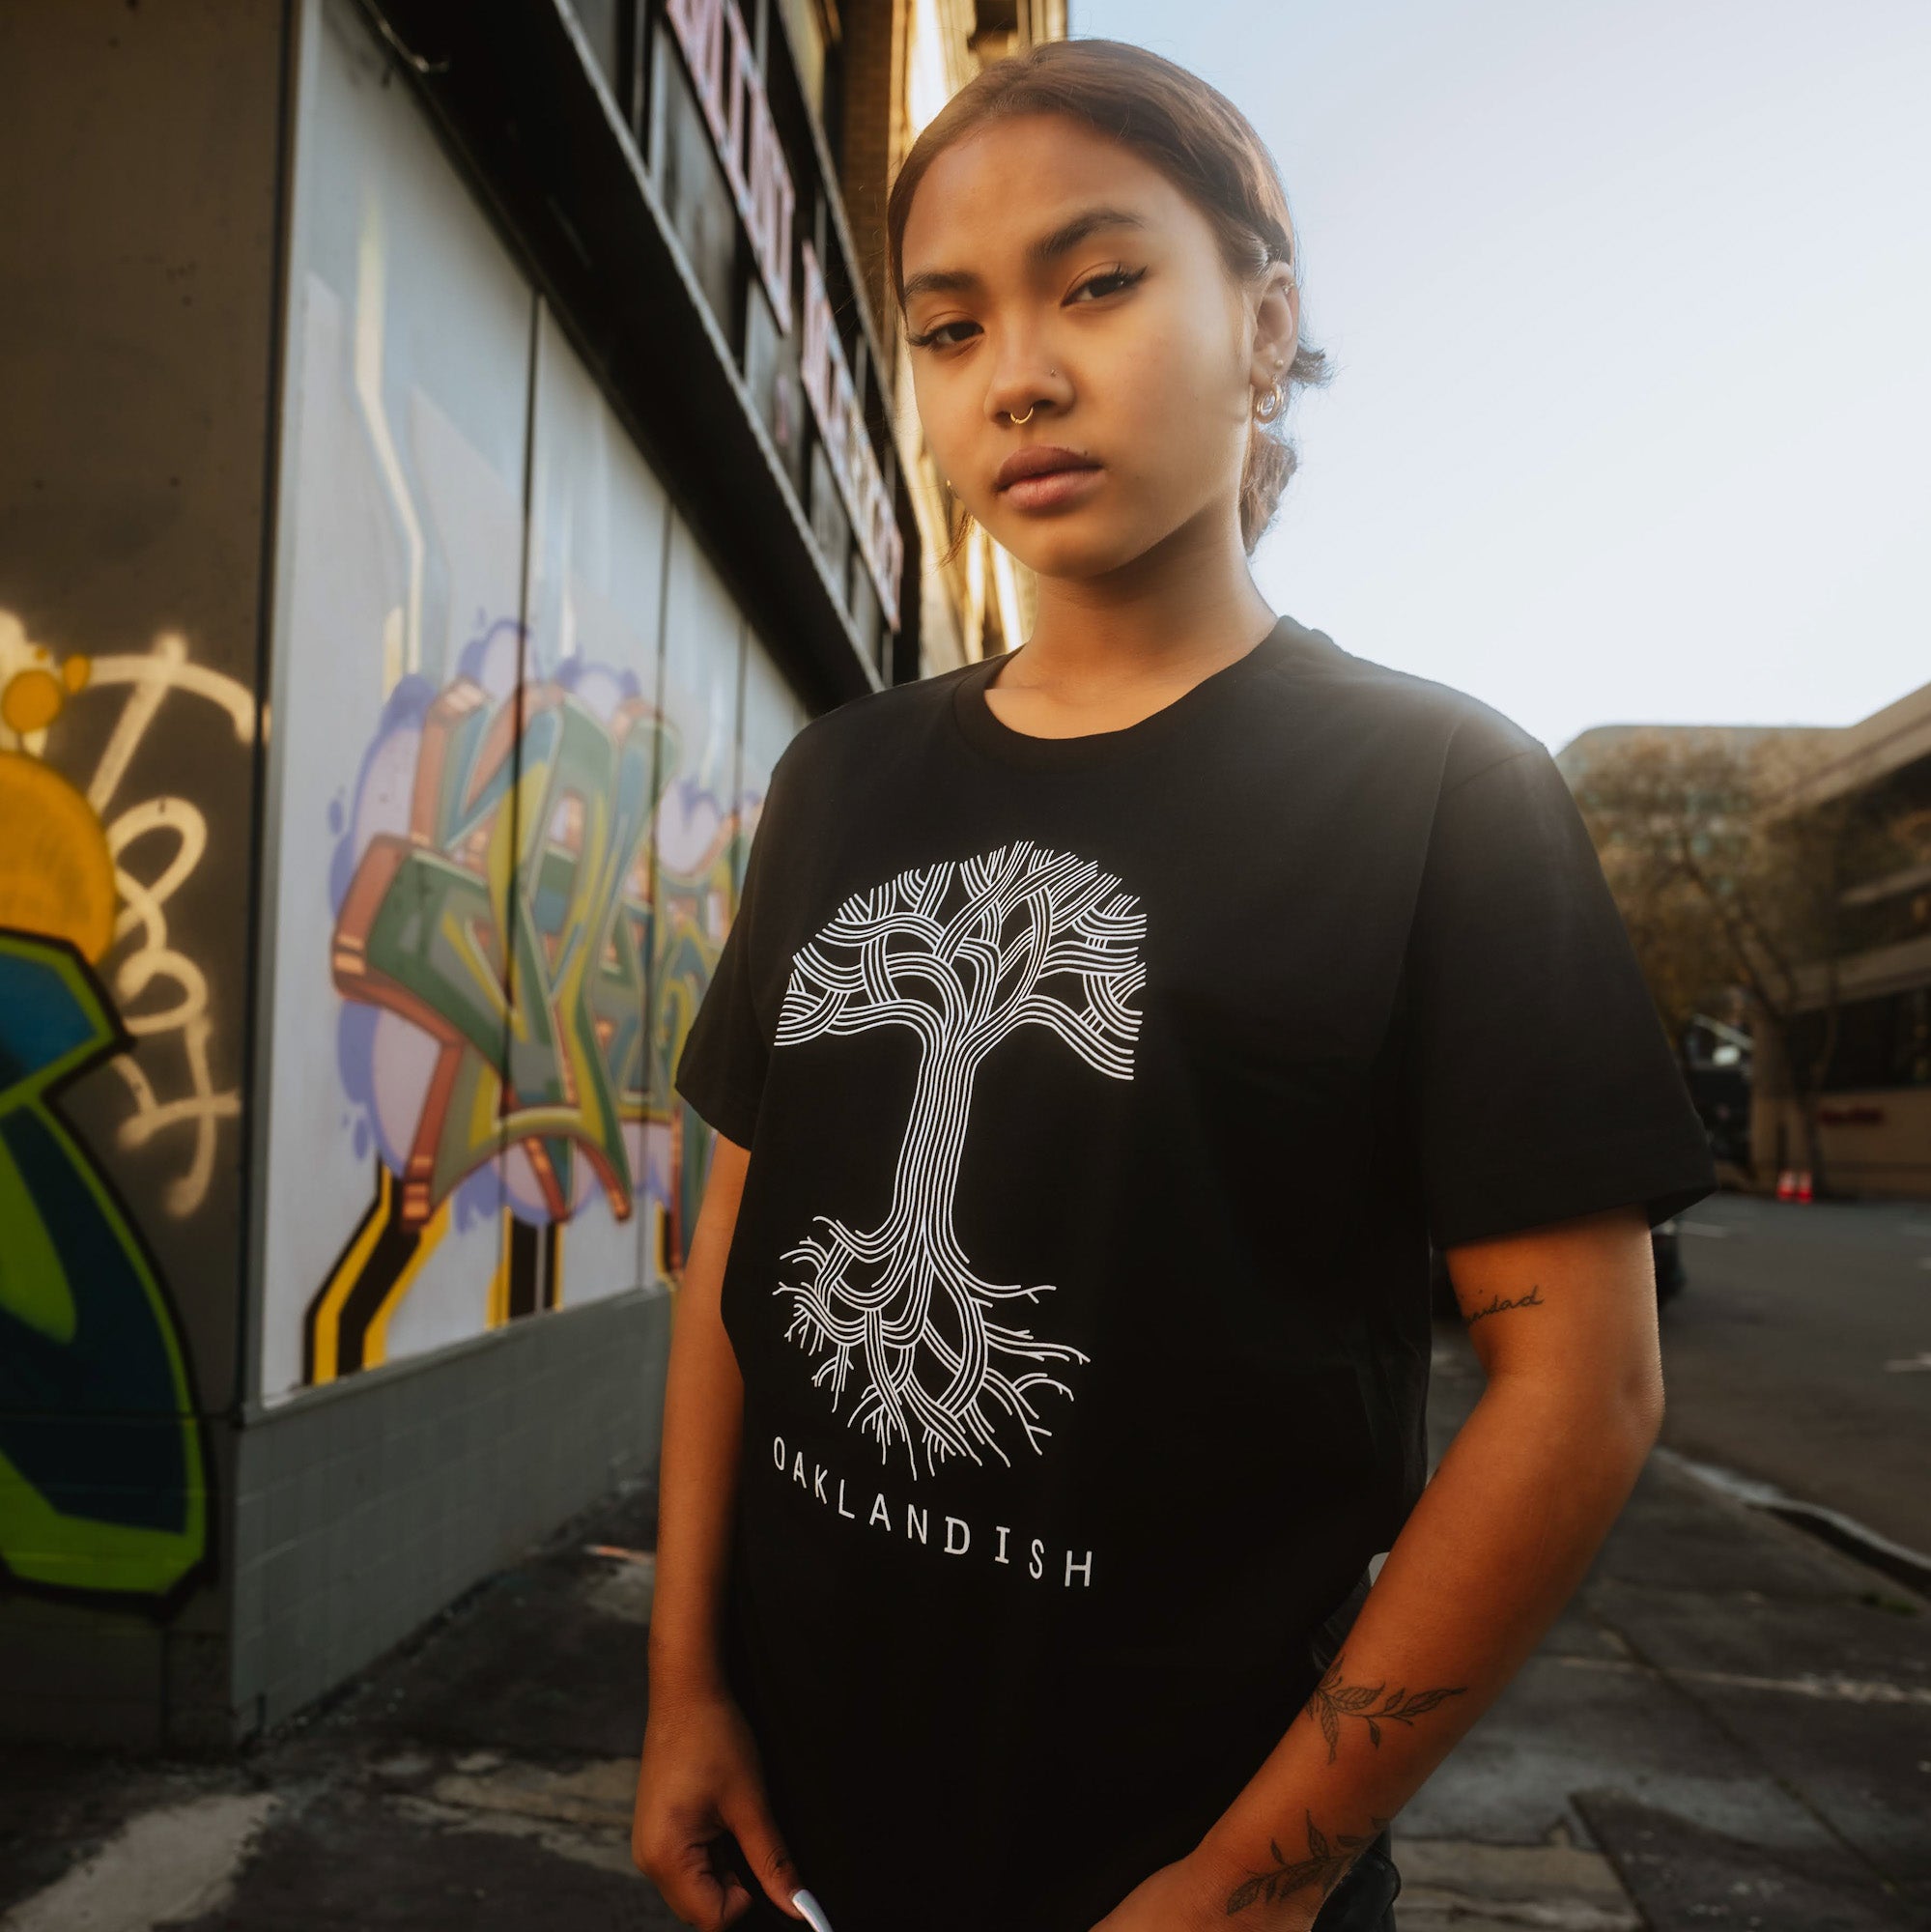 Female model wearing black t-shirt with a large white Oaklandish tree logo on the chest while standing outside.